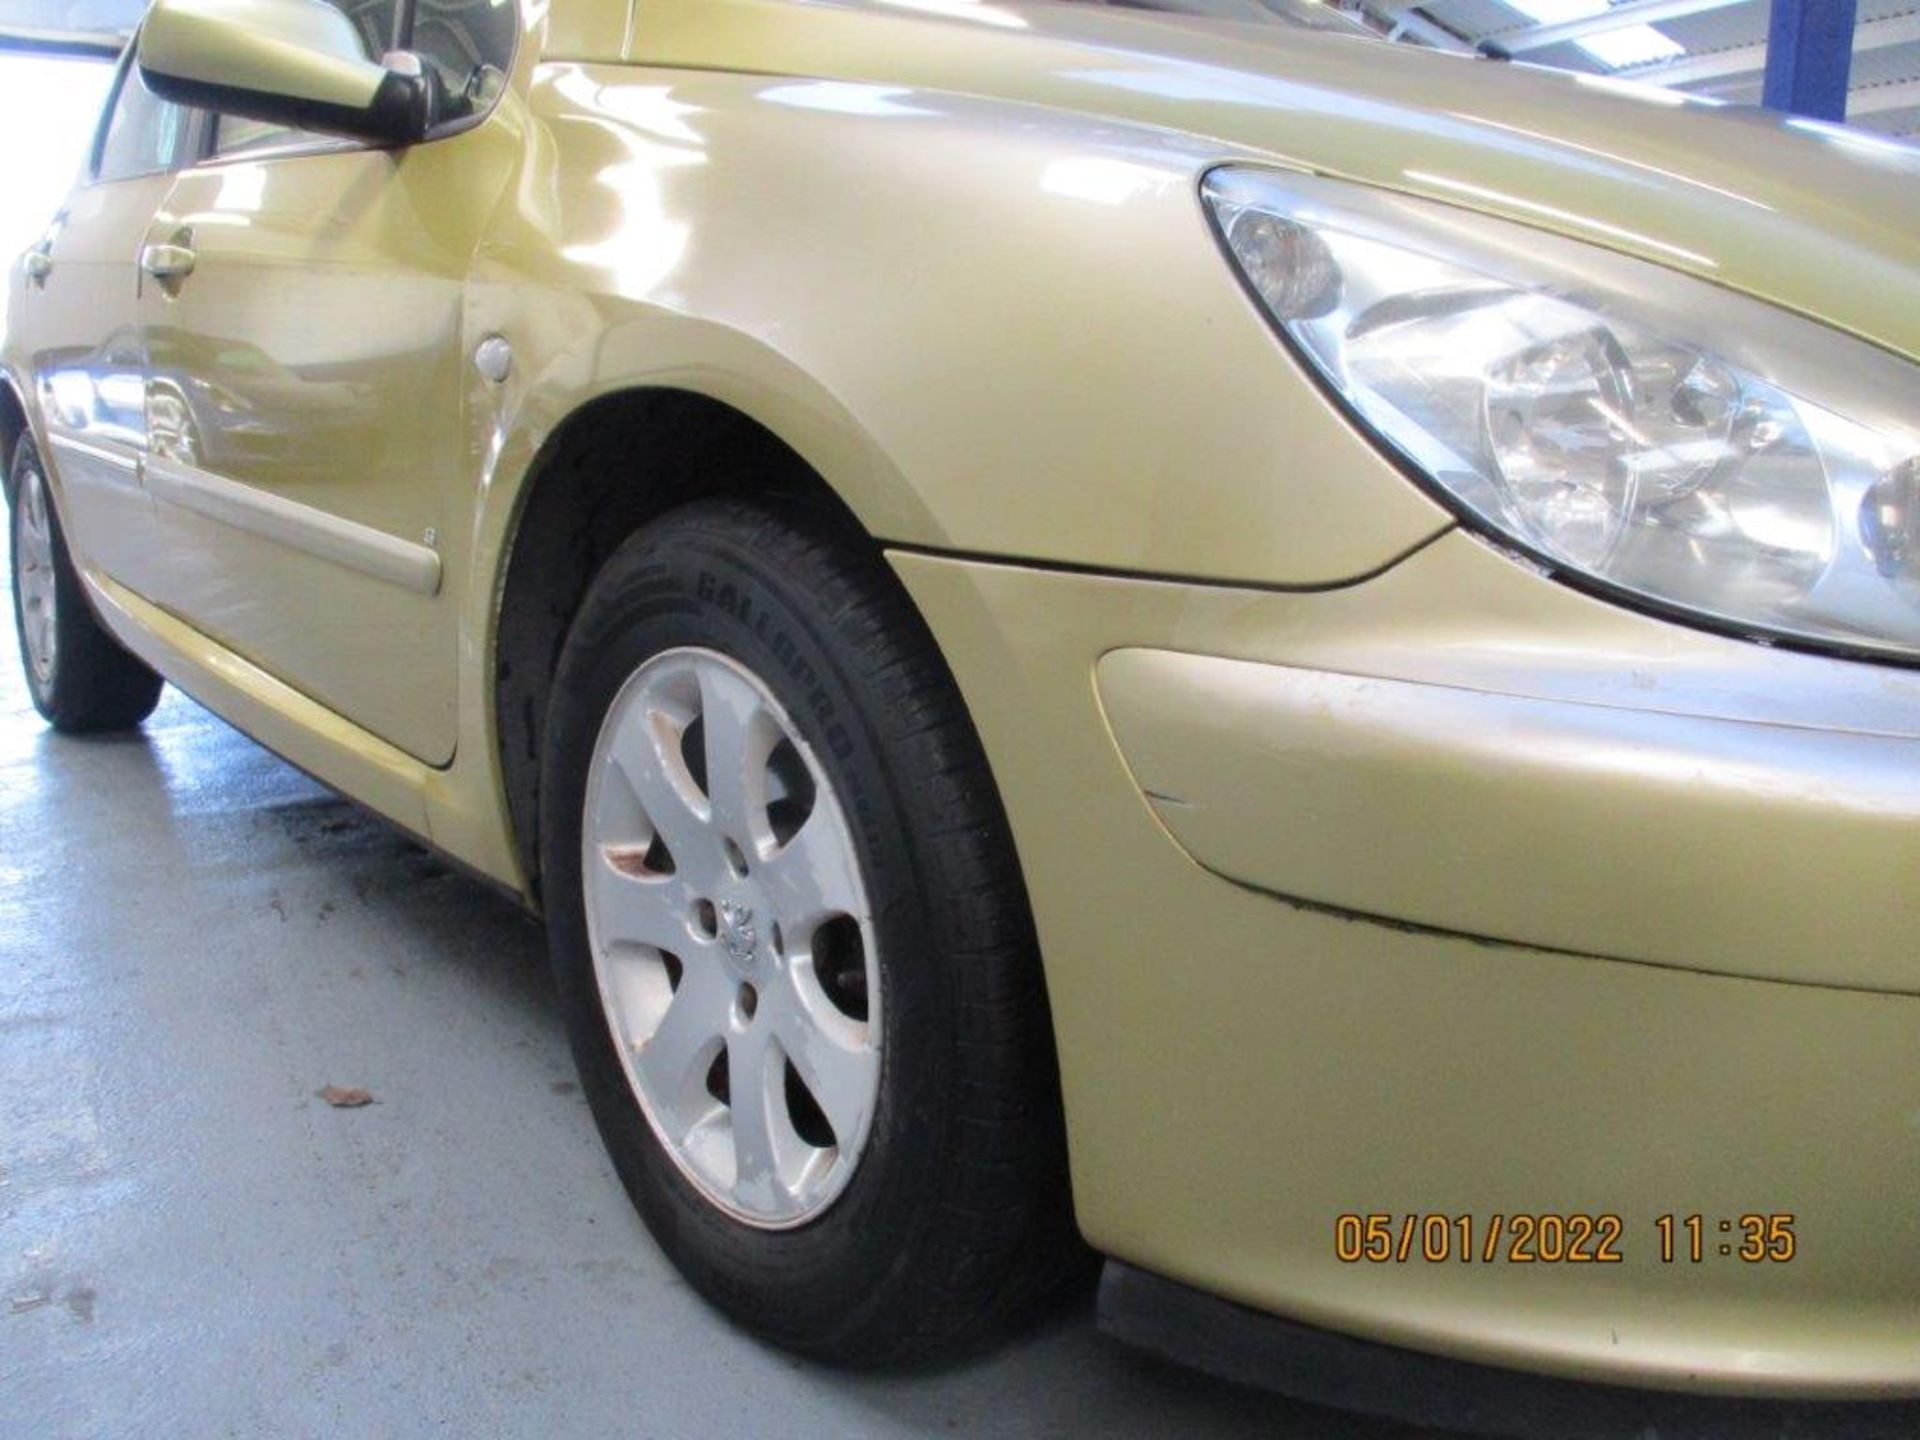 03 03 Peugeot 307 S - Image 25 of 25